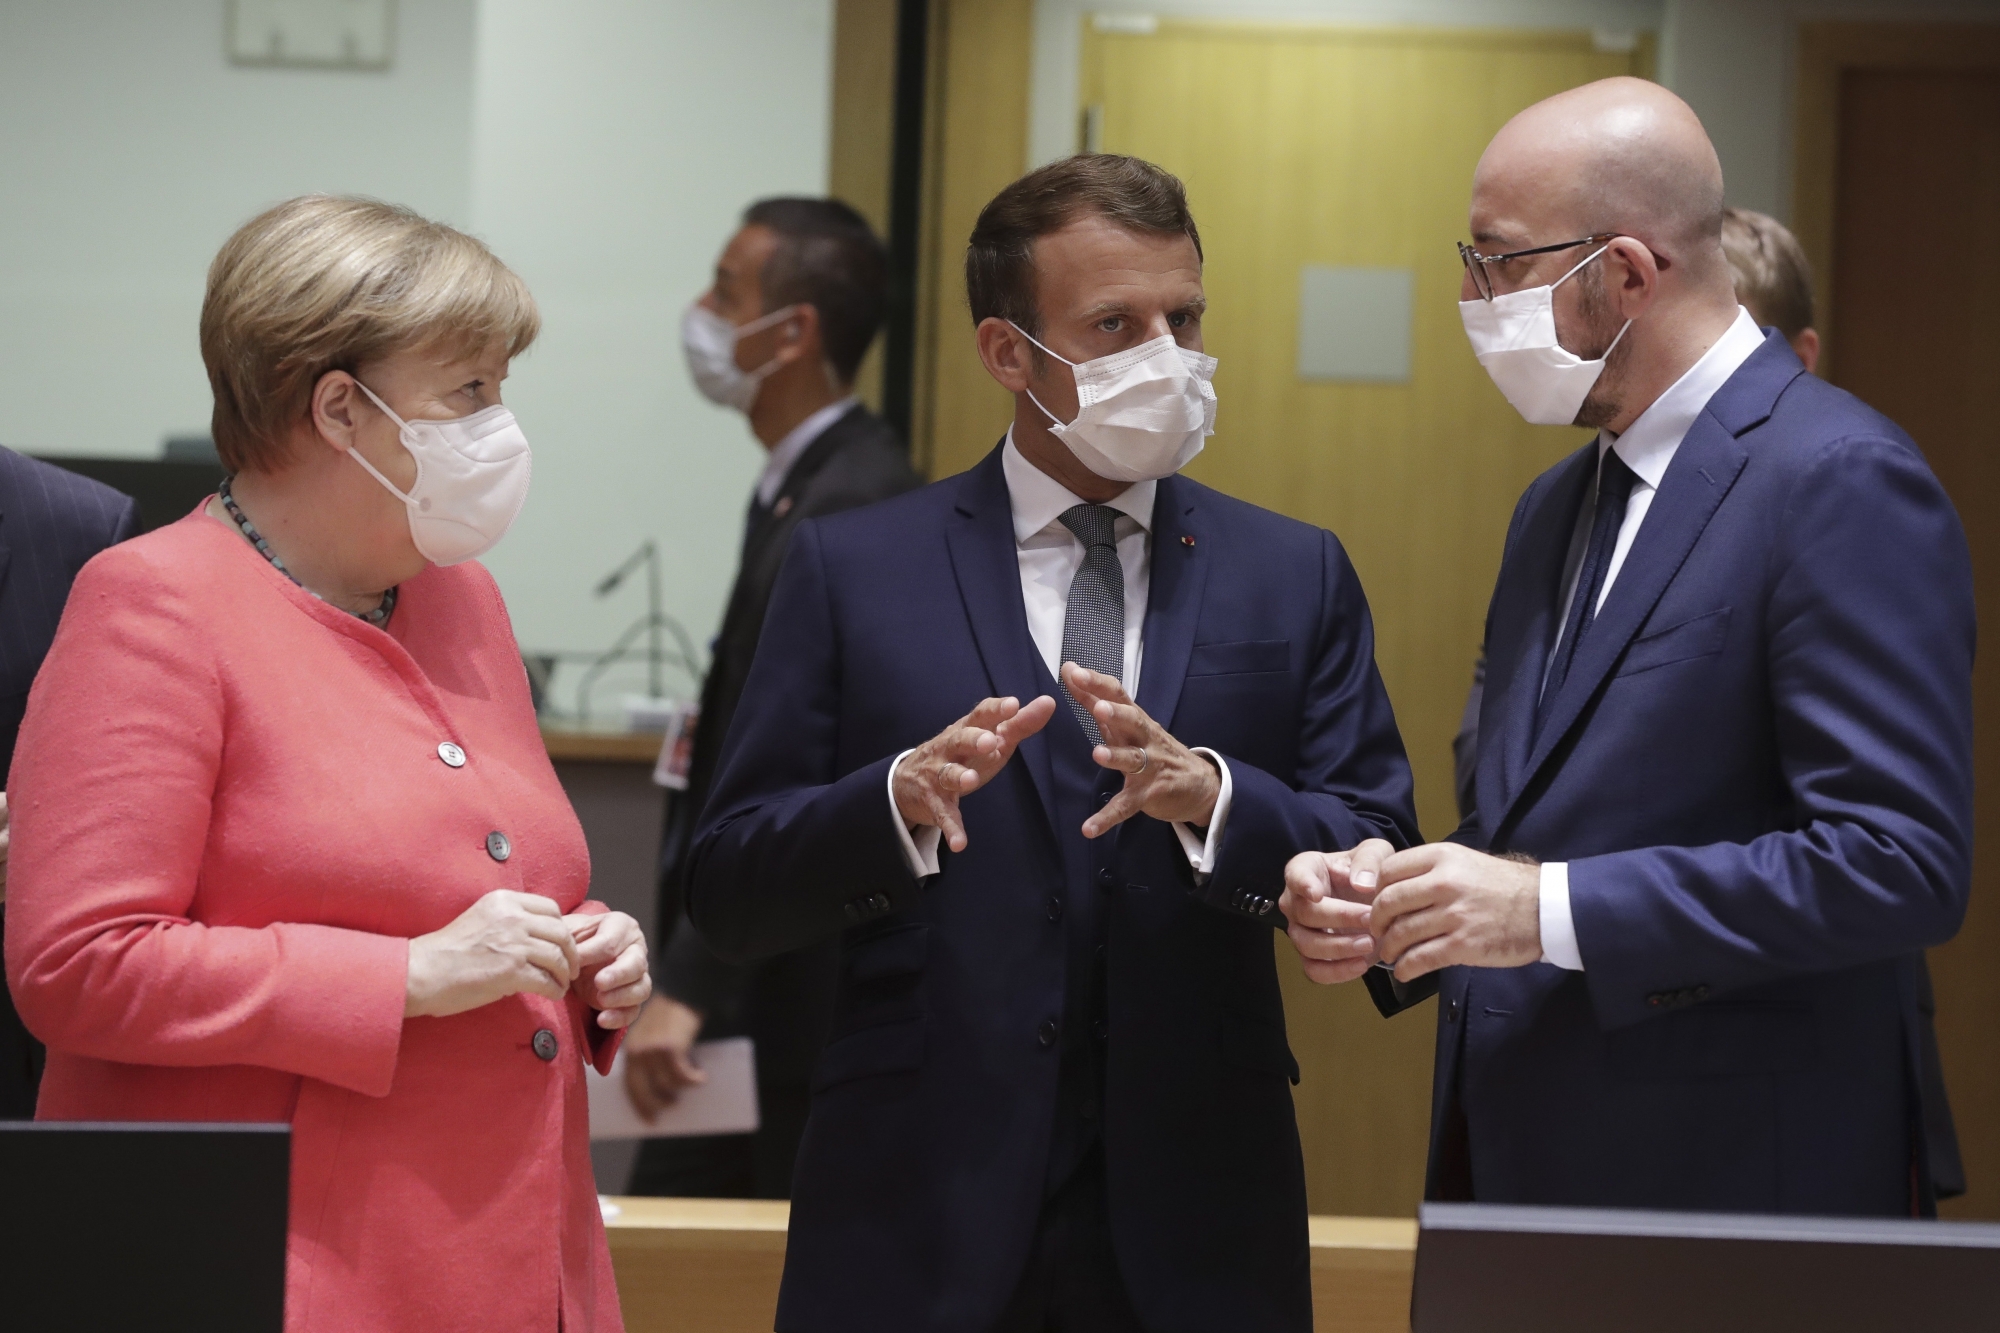 epa08551237 (L-R) Germany's Chancellor Angela Merkel, French President Emmanuel Macron and European Council President Charles Michel chat at the start of an EU summit at the European Council building in Brussels, Belgium, 17 July 2020. European Union nations leaders meet face-to-face for the first time since February to discuss plans responding to coronavirus crisis and new long-term EU budget at the special European Council on 17 and 18 July.  EPA/STEPHANIE LECOCQ / POOL ArcInfo